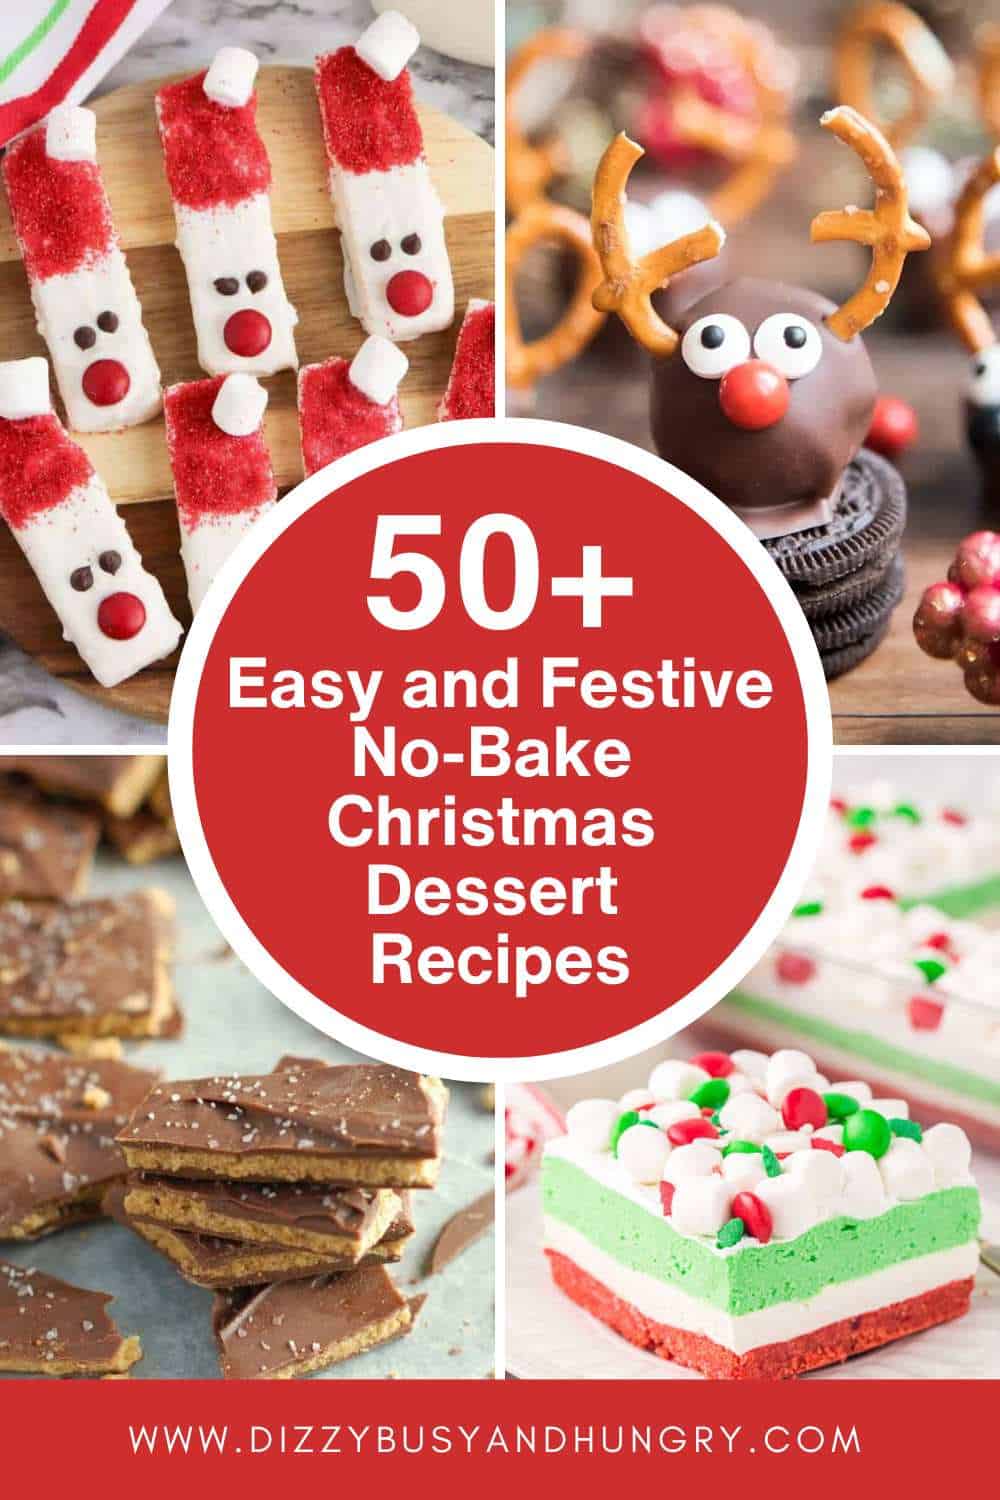 Santa Faces cookies, Reindeer cookies, chocolate bark cookies, and three-layer cake with the overlaying text 50 Plus Easy and Festive No-Bake Christmas Dessert Recipes.